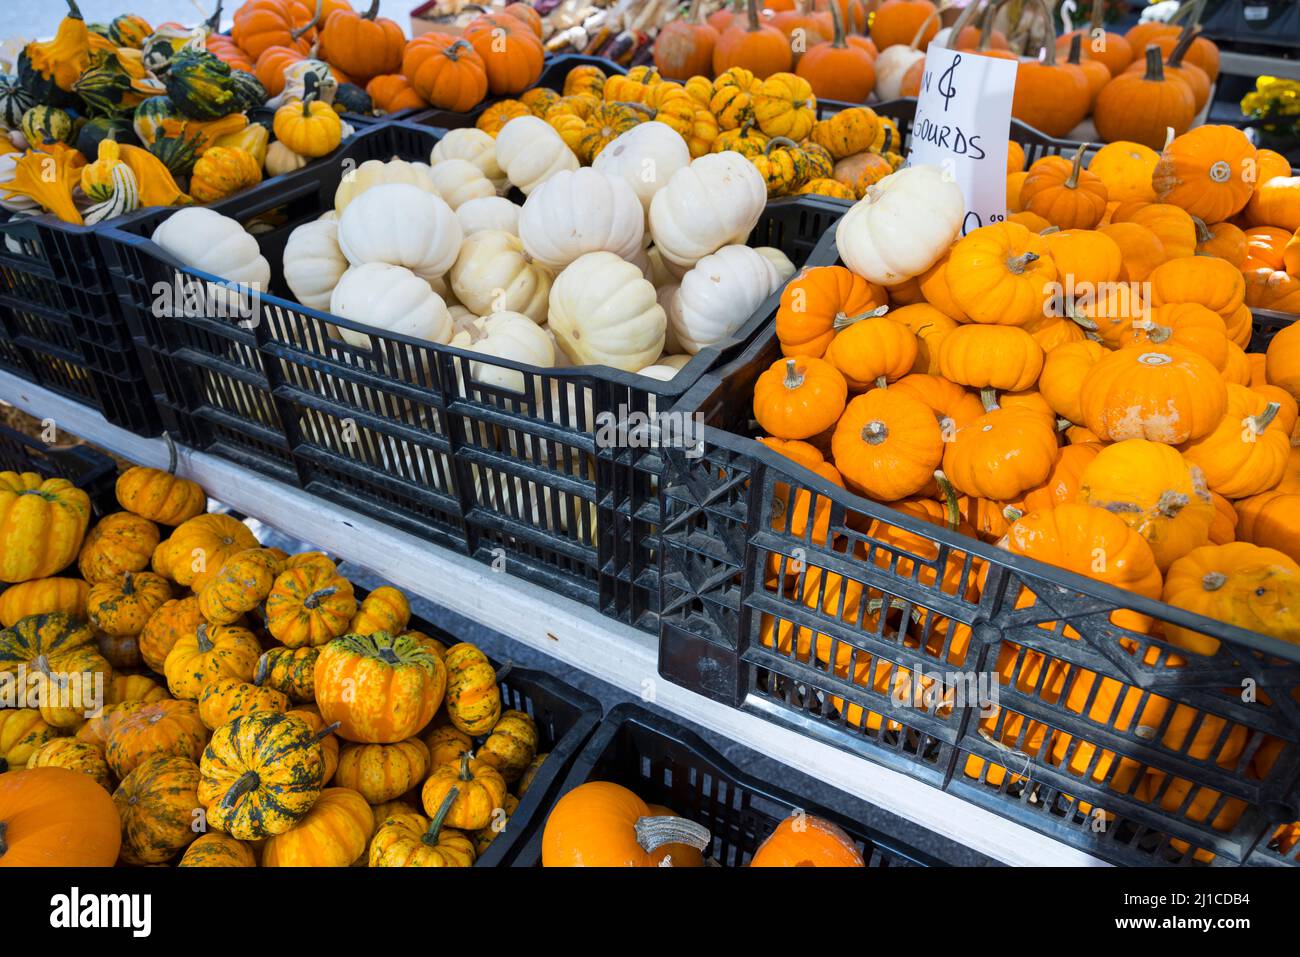 Halloween pumpkins are displayed for sale at Union Square NYC Stock Photo